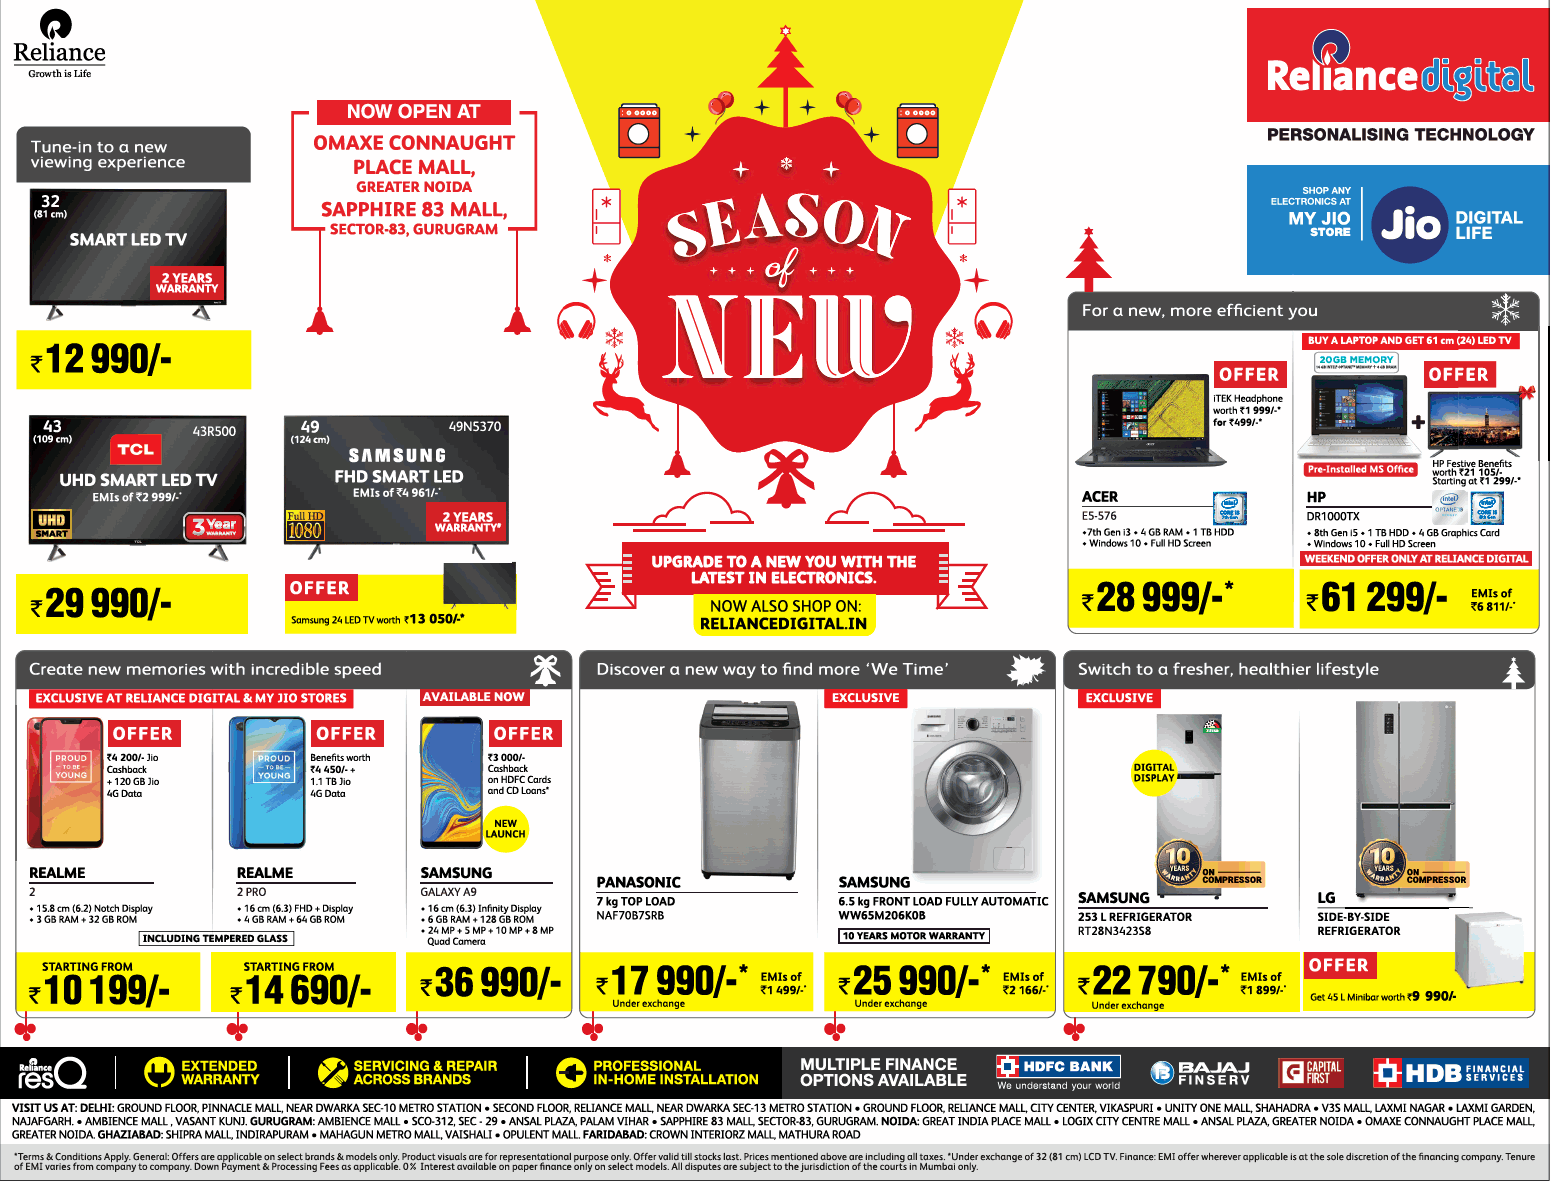 reliance-digital-season-new-sale-amazing-offers-ad-times-of-india-delhi-01-12-2018.png